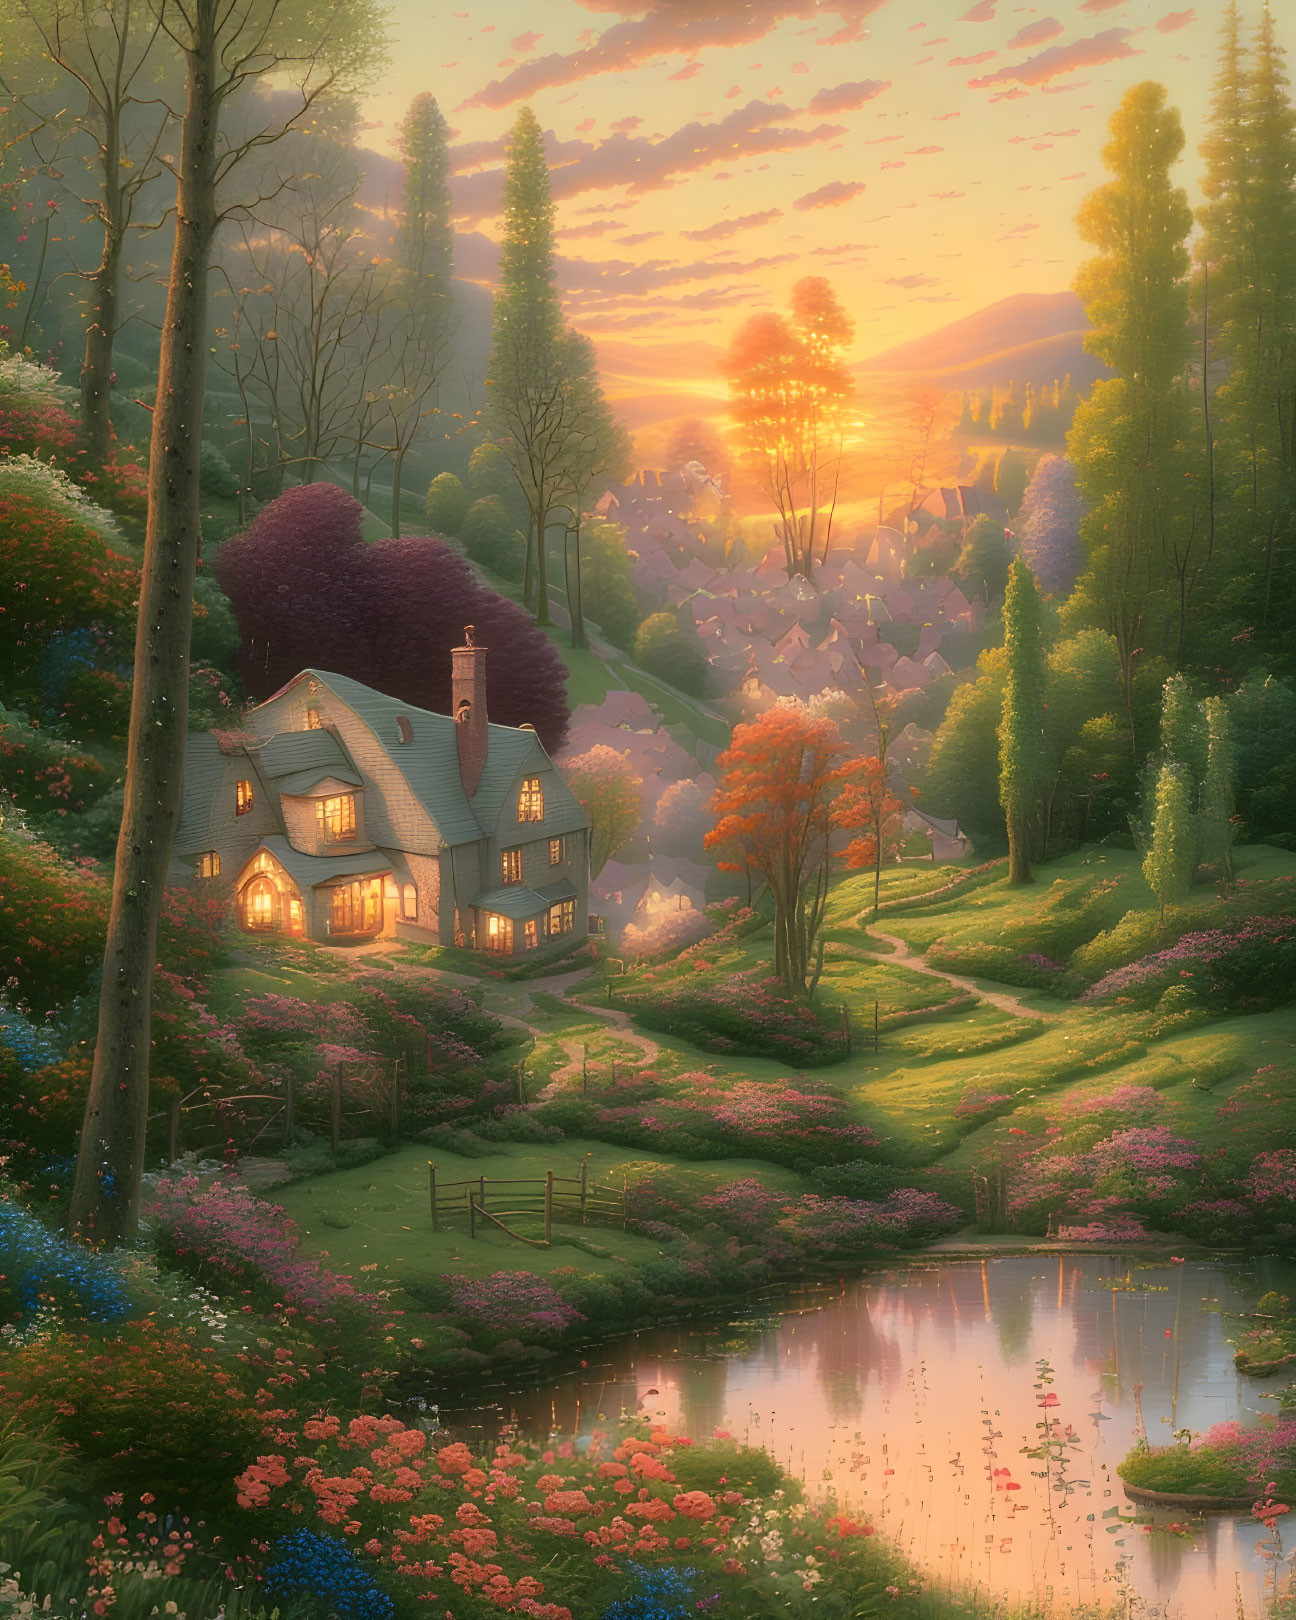 Sunset Glow on Cottage Surrounded by Trees and Flowers